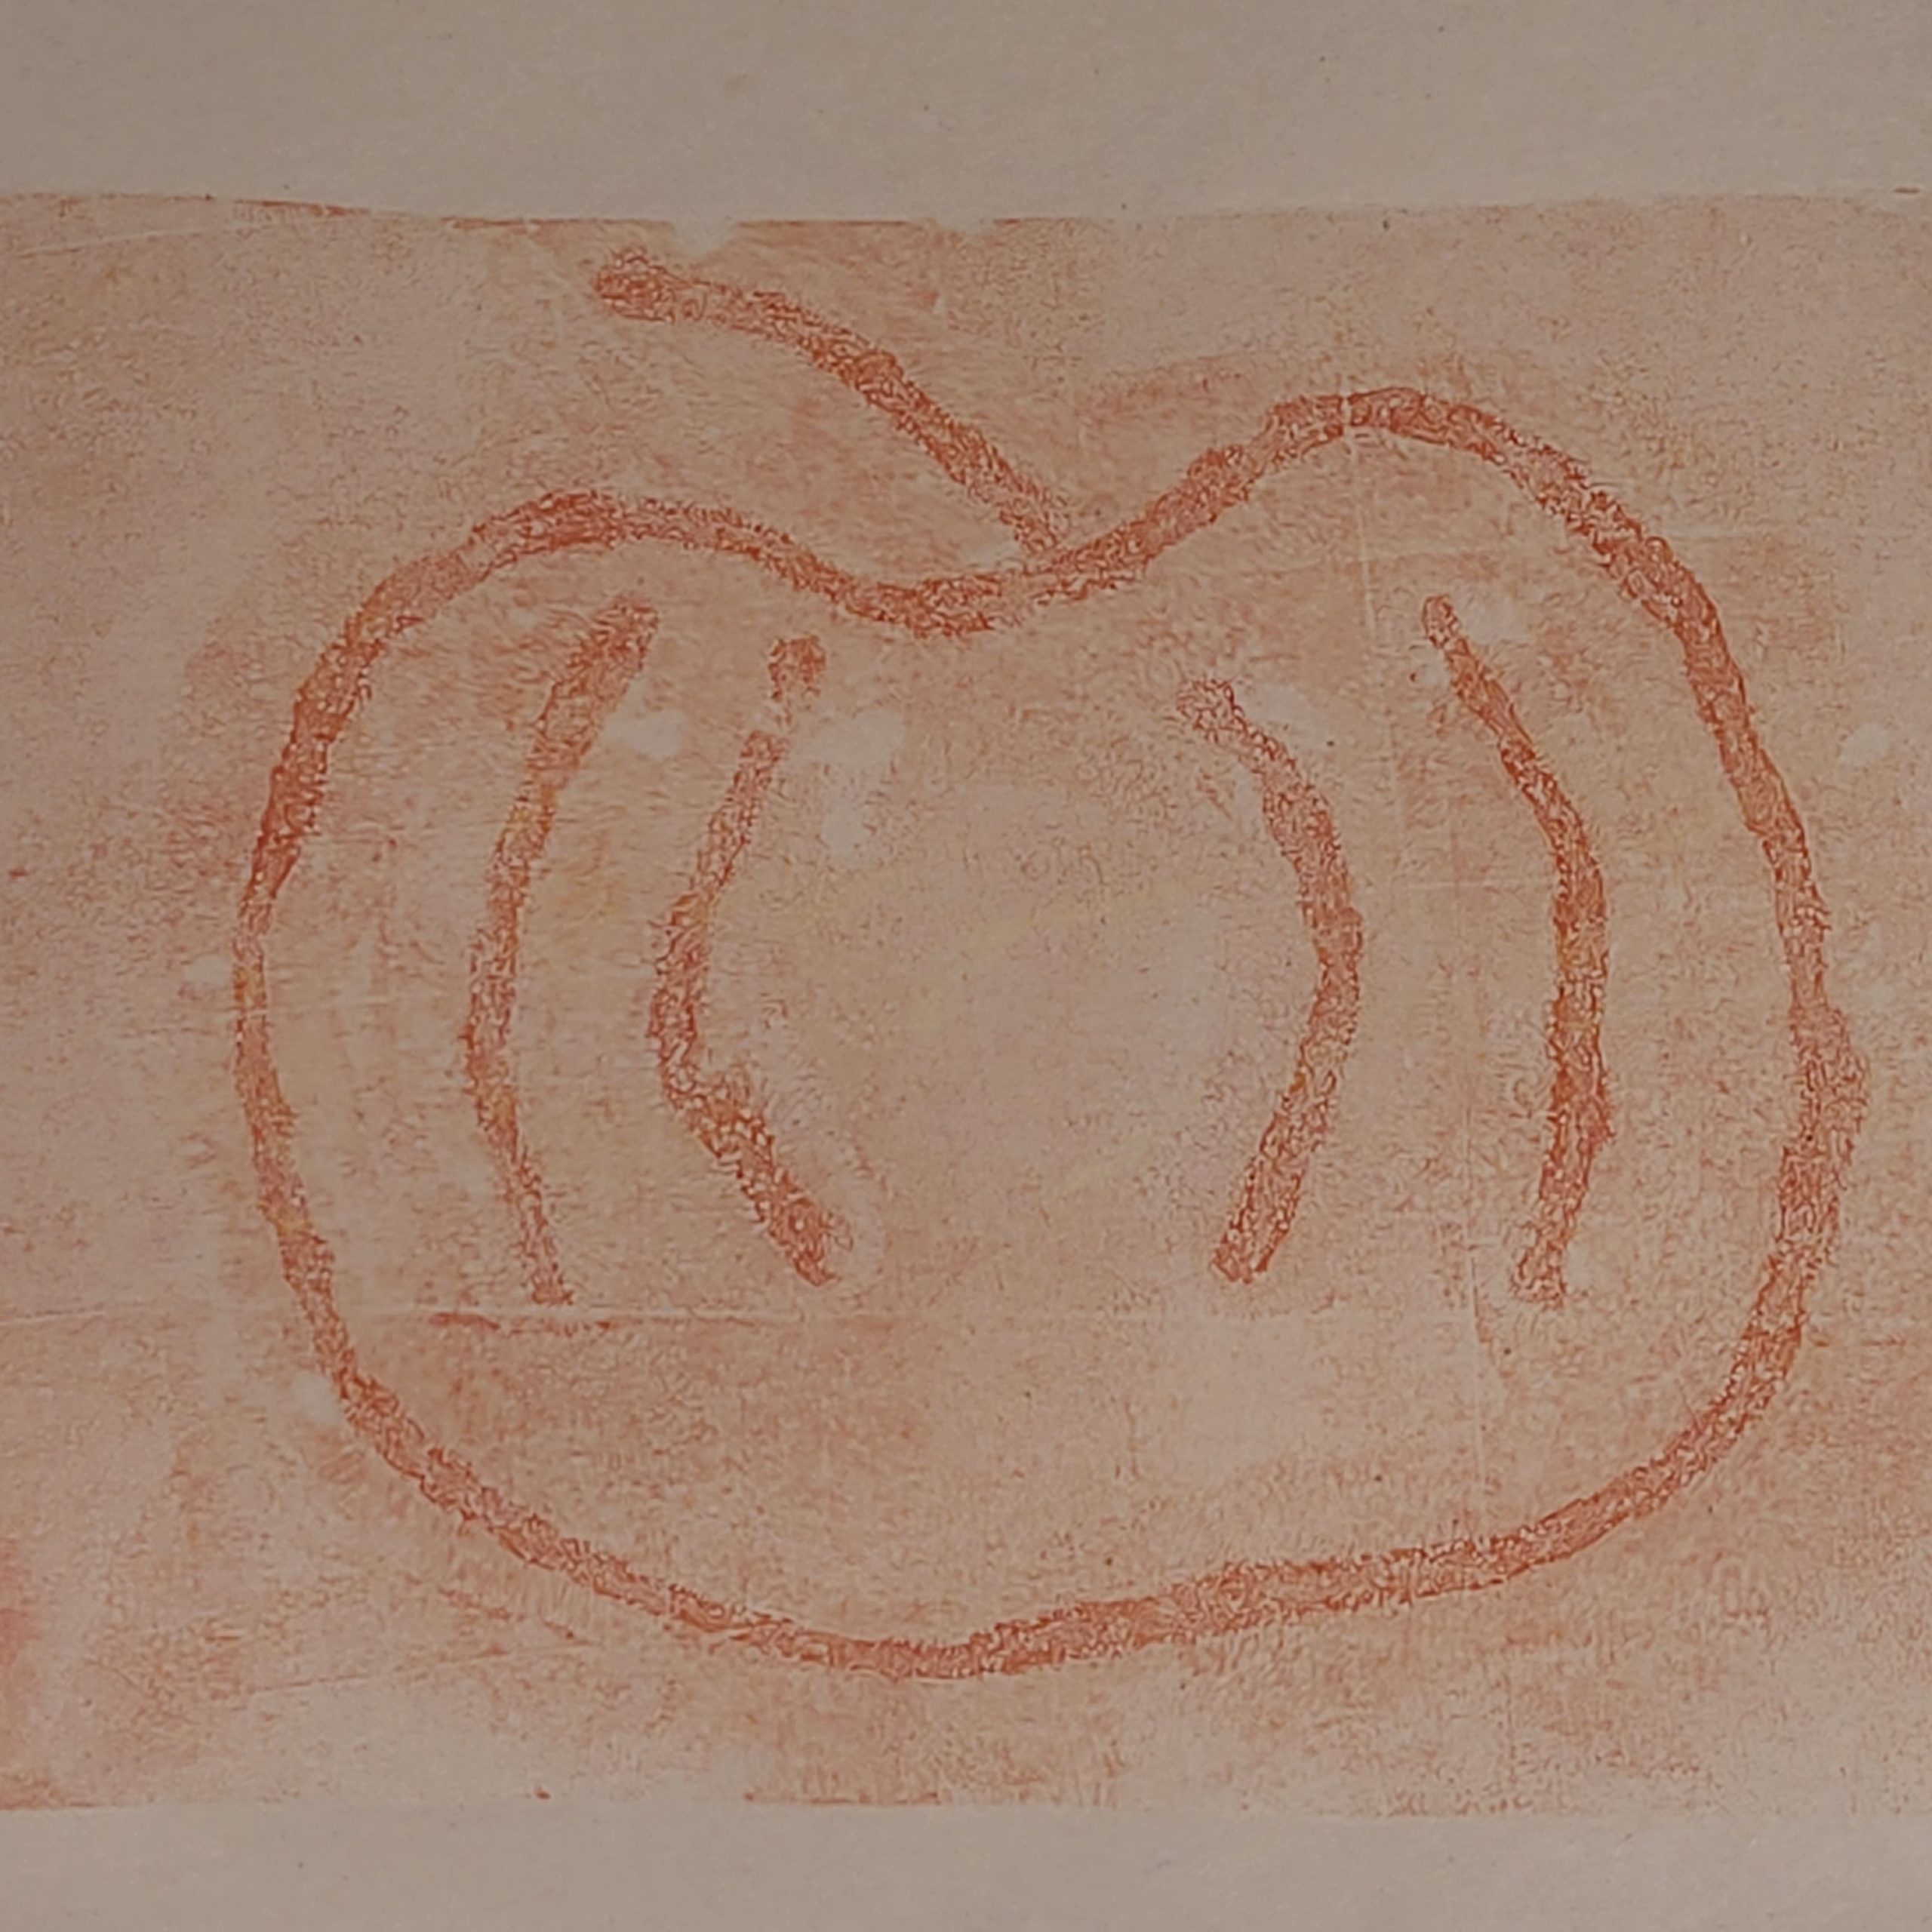 Same style as before, but this time 1 image - just the 2nd print of what the yarn left behind. The image is of a pumpkin and the lines are in orange.